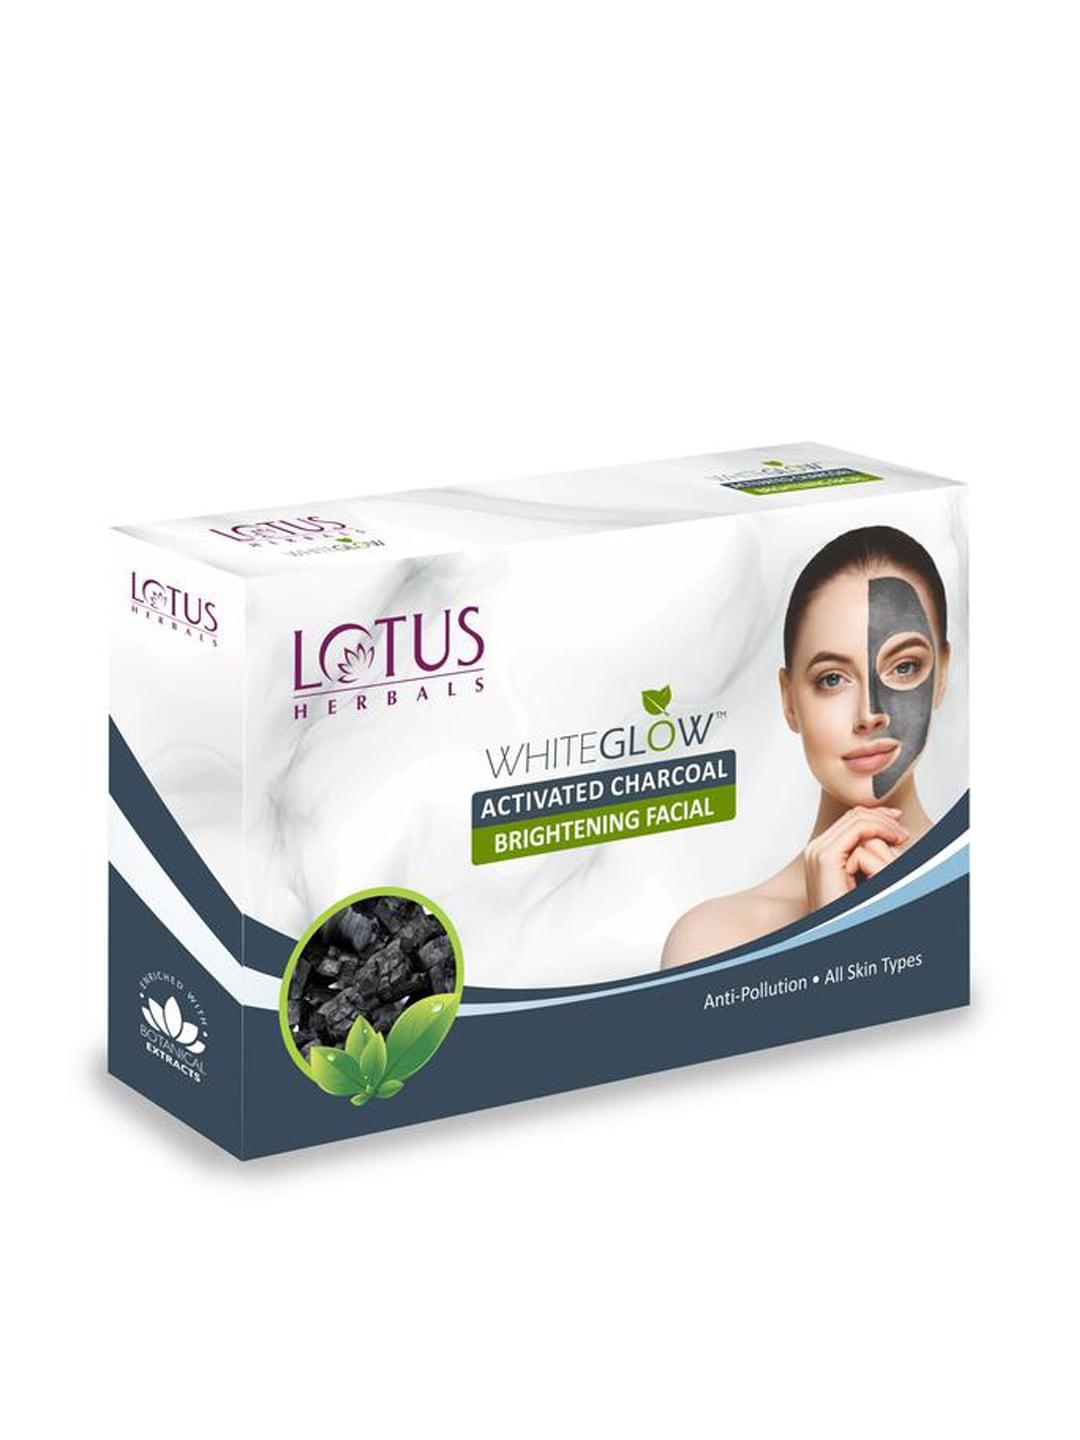 Lotus Herbals WhiteGlow 4 In 1 Activated Charcoal Brightening Facial Kit